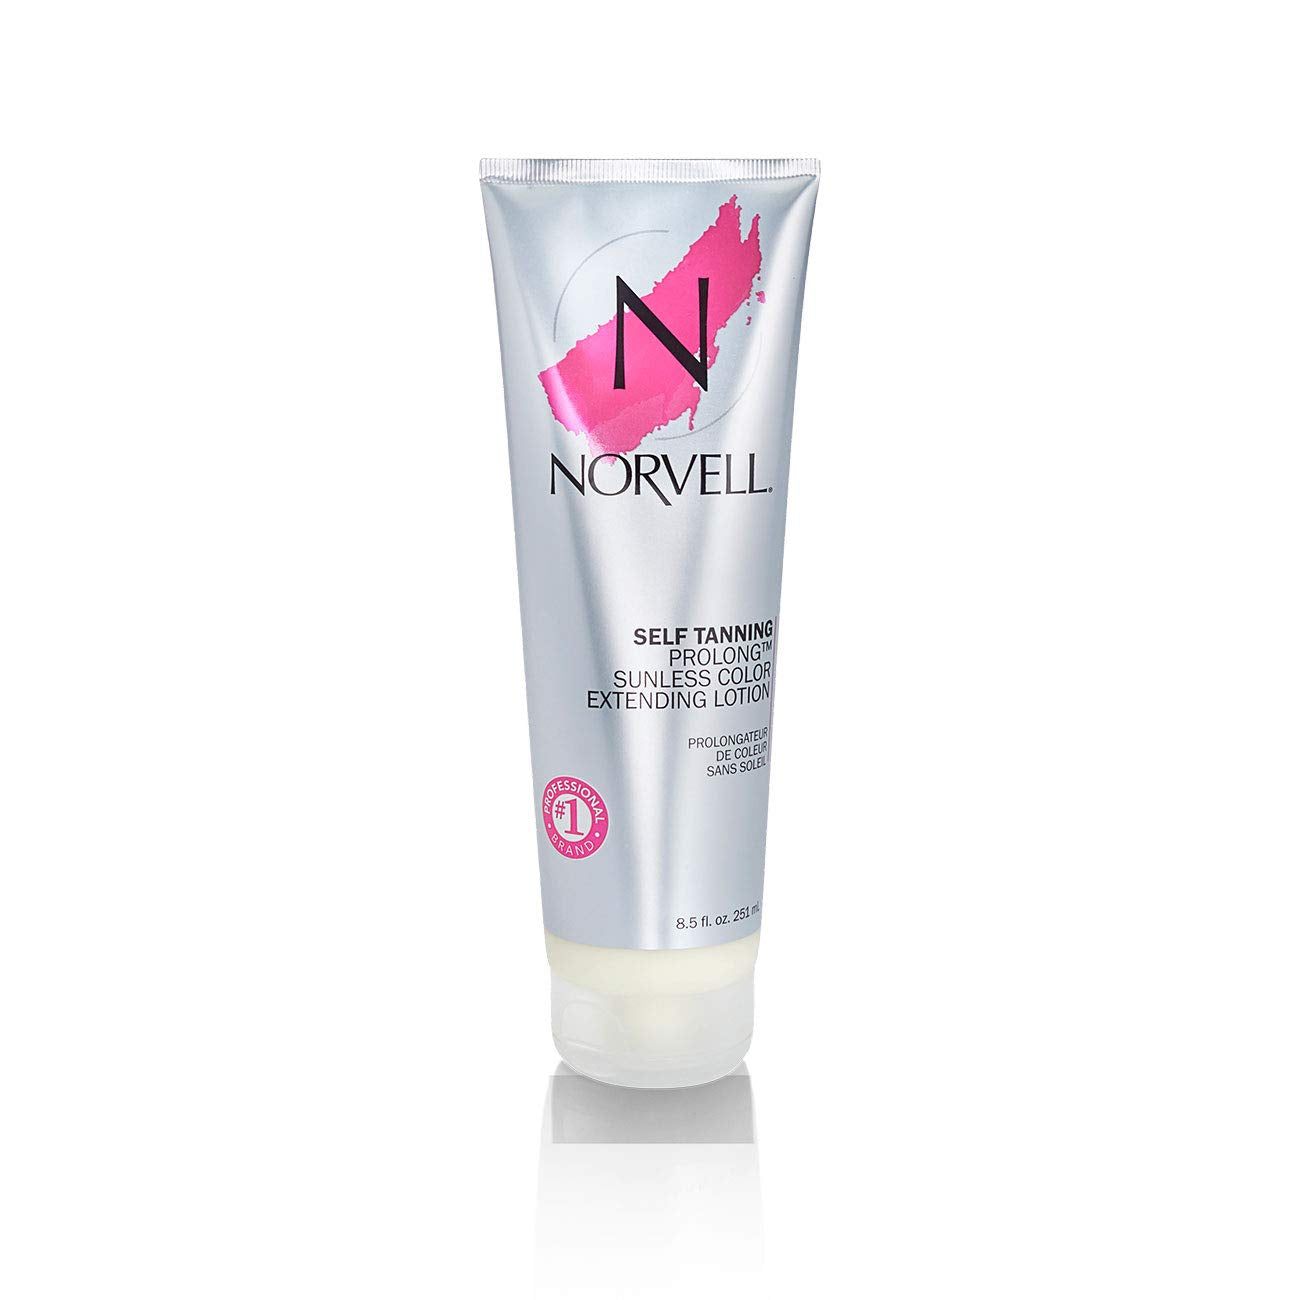 Norvell Self Tanning Prolong sunless Color Extending Lotion